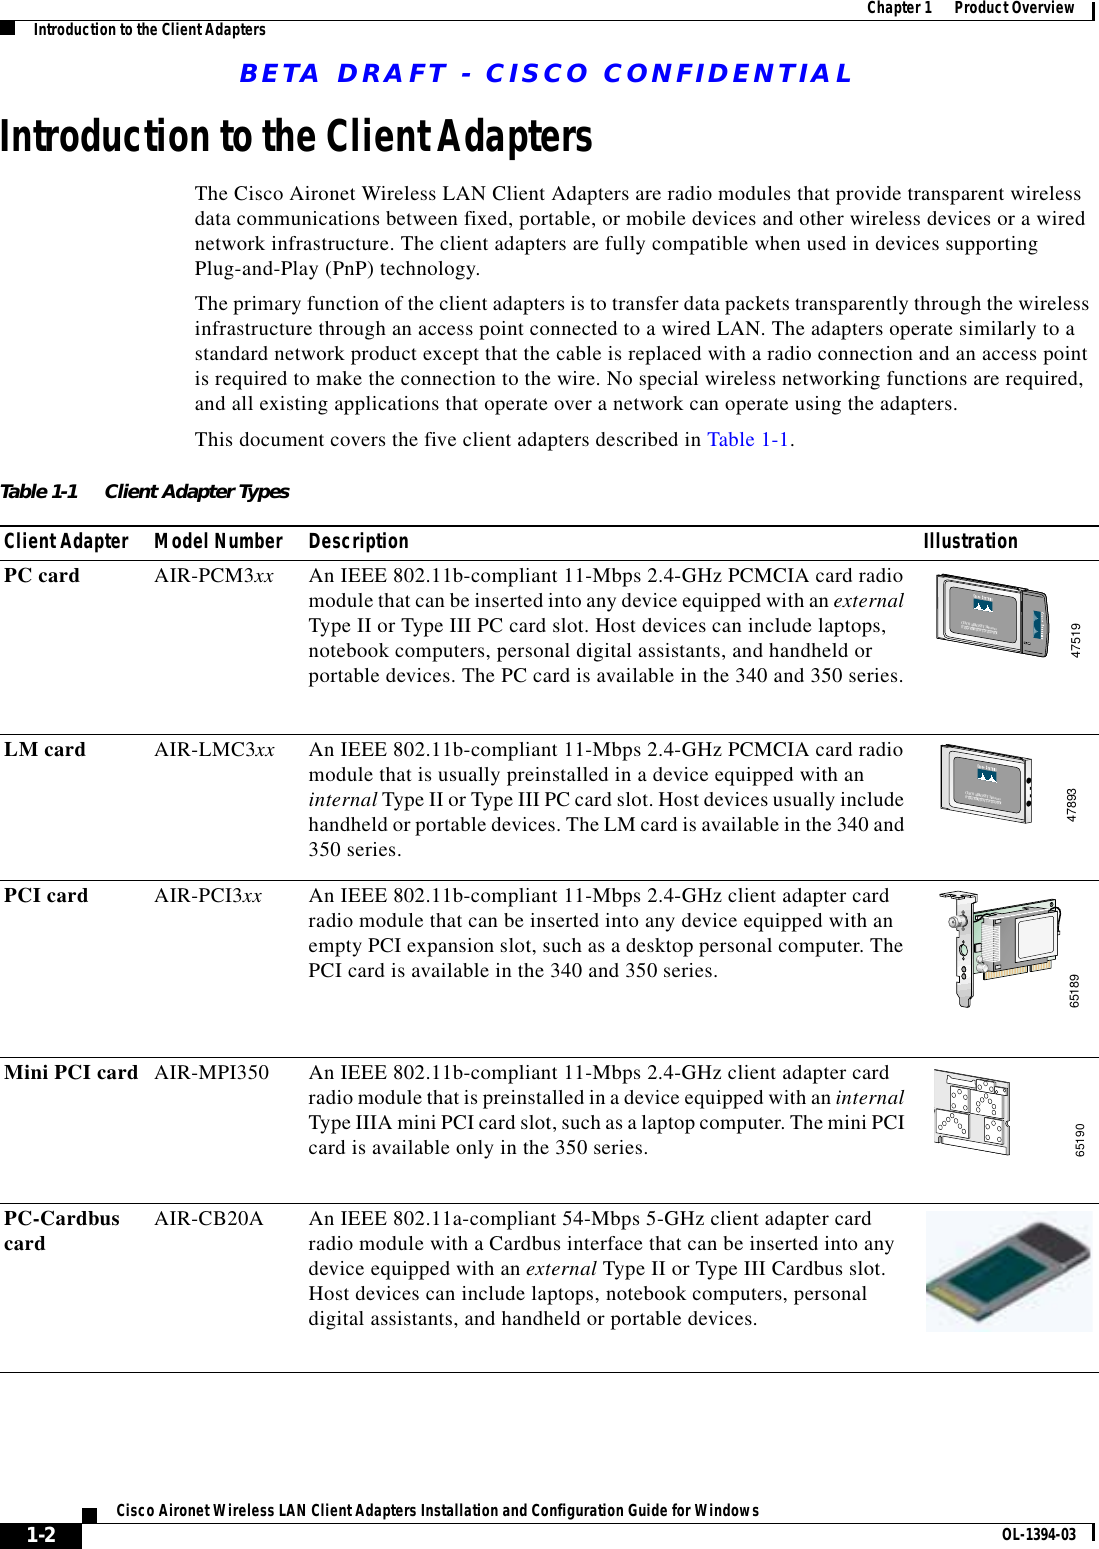 BETA DRAFT - CISCO CONFIDENTIAL1-2Cisco Aironet Wireless LAN Client Adapters Installation and Configuration Guide for Windows OL-1394-03Chapter 1      Product OverviewIntroduction to the Client AdaptersIntroduction to the Client AdaptersThe Cisco Aironet Wireless LAN Client Adapters are radio modules that provide transparent wireless data communications between fixed, portable, or mobile devices and other wireless devices or a wired network infrastructure. The client adapters are fully compatible when used in devices supporting Plug-and-Play (PnP) technology.The primary function of the client adapters is to transfer data packets transparently through the wireless infrastructure through an access point connected to a wired LAN. The adapters operate similarly to a standard network product except that the cable is replaced with a radio connection and an access point is required to make the connection to the wire. No special wireless networking functions are required, and all existing applications that operate over a network can operate using the adapters.This document covers the five client adapters described in Table 1-1.Table 1-1 Client Adapter TypesClient Adapter Model Number Description IllustrationPC card AIR-PCM3xx An IEEE 802.11b-compliant 11-Mbps 2.4-GHz PCMCIA card radio module that can be inserted into any device equipped with an external Type II or Type III PC card slot. Host devices can include laptops, notebook computers, personal digital assistants, and handheld or portable devices. The PC card is available in the 340 and 350 series.LM card AIR-LMC3xx An IEEE 802.11b-compliant 11-Mbps 2.4-GHz PCMCIA card radio module that is usually preinstalled in a device equipped with an internal Type II or Type III PC card slot. Host devices usually include handheld or portable devices. The LM card is available in the 340 and 350 series.PCI card AIR-PCI3xx An IEEE 802.11b-compliant 11-Mbps 2.4-GHz client adapter card radio module that can be inserted into any device equipped with an empty PCI expansion slot, such as a desktop personal computer. The PCI card is available in the 340 and 350 series.Mini PCI card AIR-MPI350 An IEEE 802.11b-compliant 11-Mbps 2.4-GHz client adapter card radio module that is preinstalled in a device equipped with an internal Type IIIA mini PCI card slot, such as a laptop computer. The mini PCI card is available only in the 350 series.PC-Cardbus card AIR-CB20A An IEEE 802.11a-compliant 54-Mbps 5-GHz client adapter card radio module with a Cardbus interface that can be inserted into any device equipped with an external Type II or Type III Cardbus slot. Host devices can include laptops, notebook computers, personal digital assistants, and handheld or portable devices.CISCO AIRONET 340 SERIES11 Mbps WIRELESS LAN ADAPTER47519CISCO AIRONET 340 SERIES11 Mbps WIRELESS LAN ADAPTER478936518965190